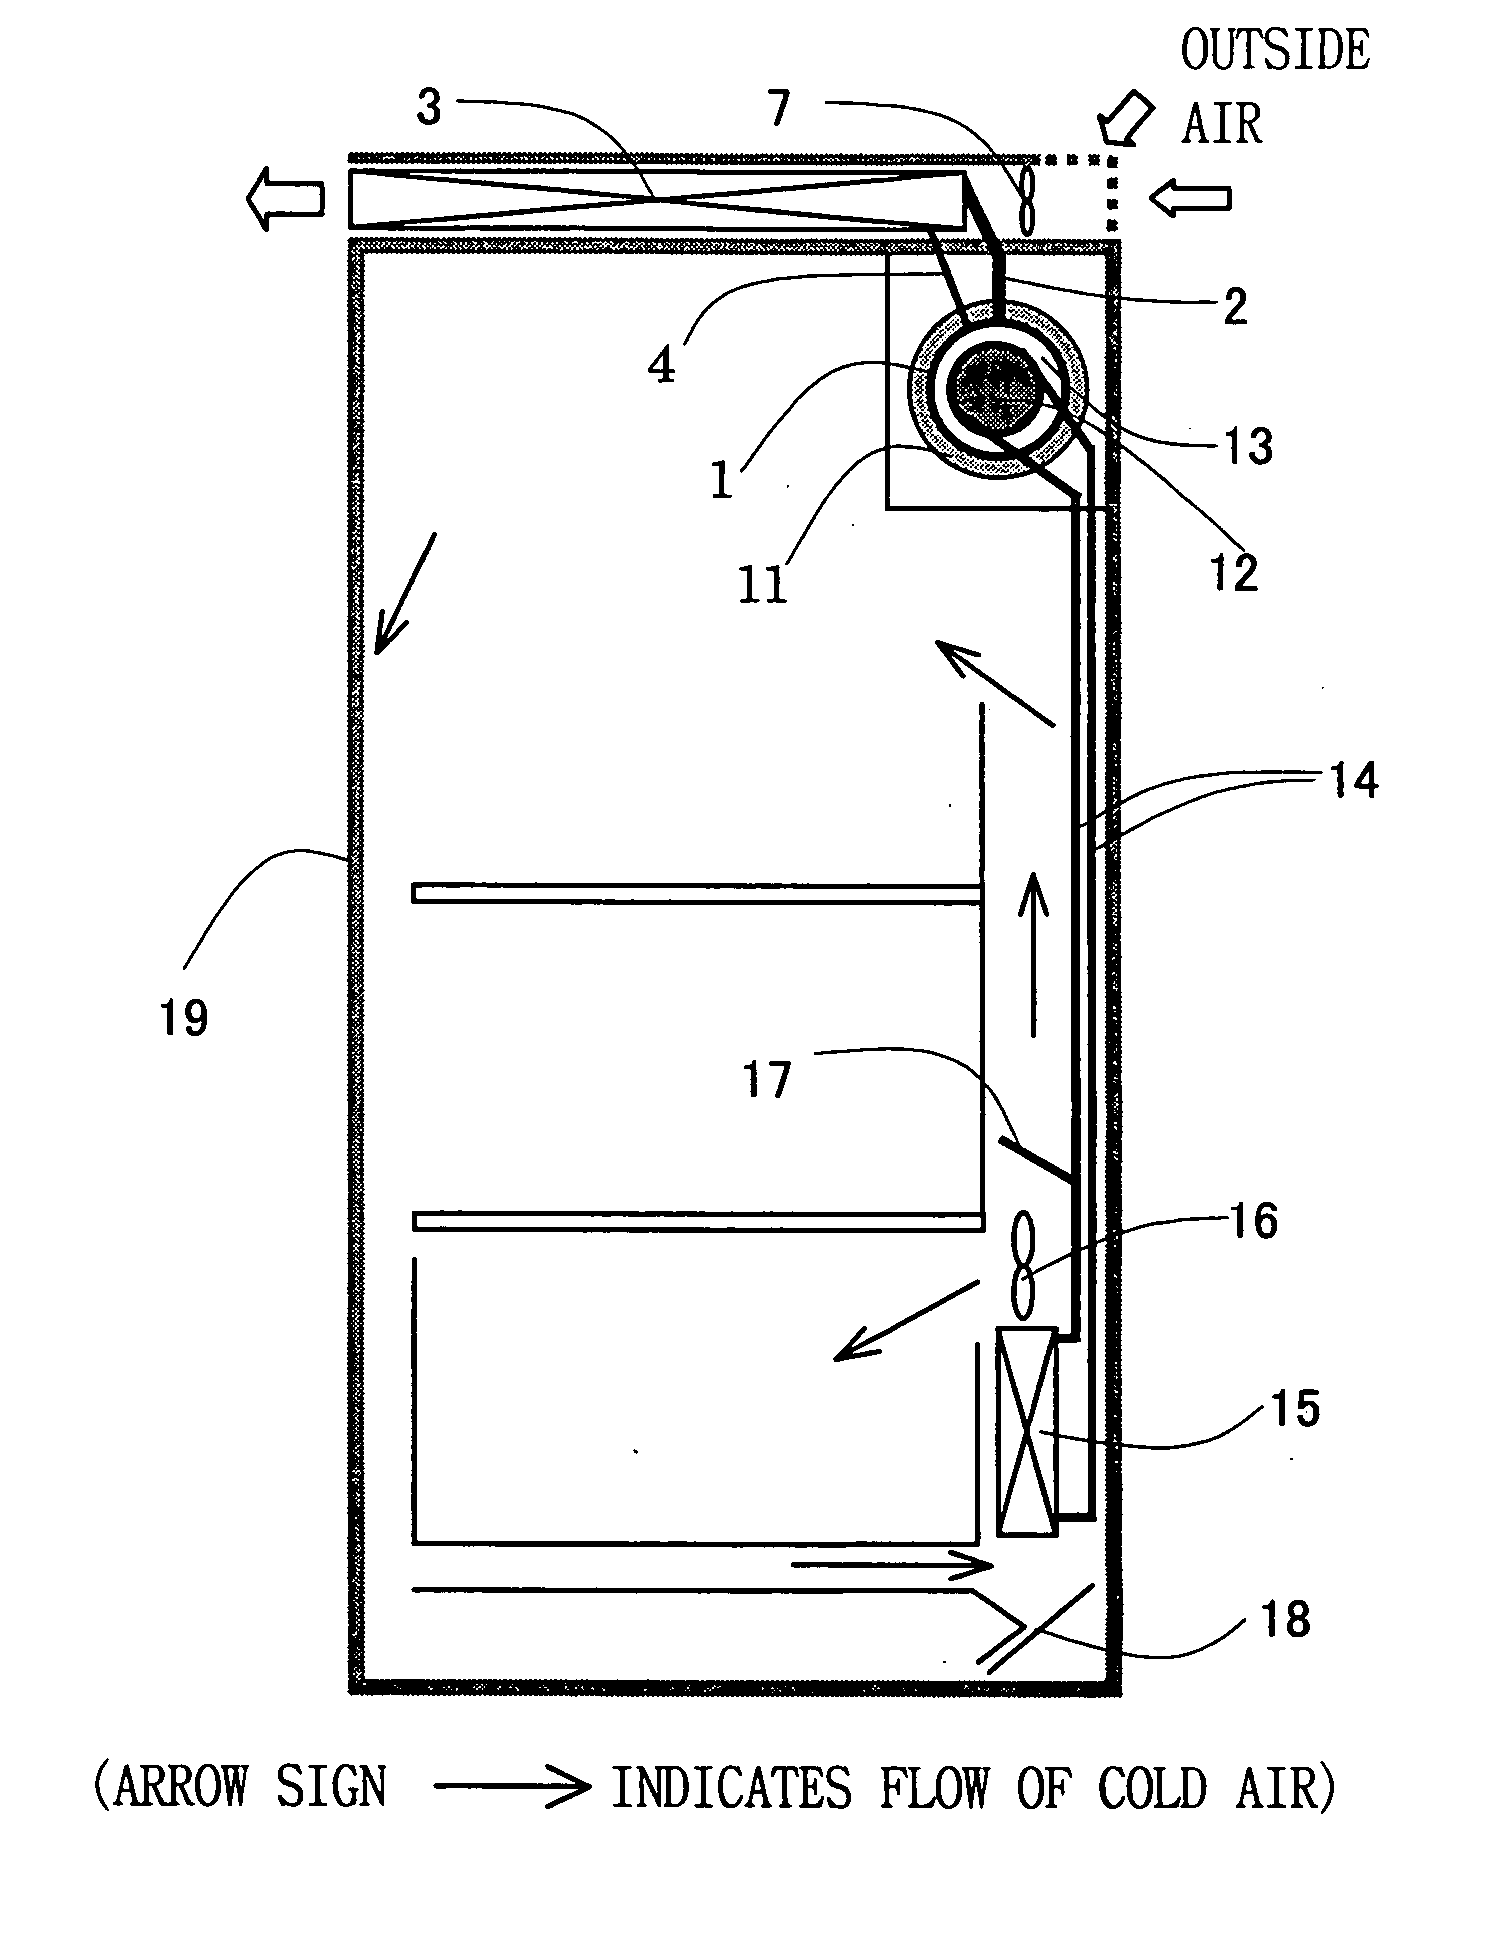 Loop-type thermosiphon and stirling refrigerator